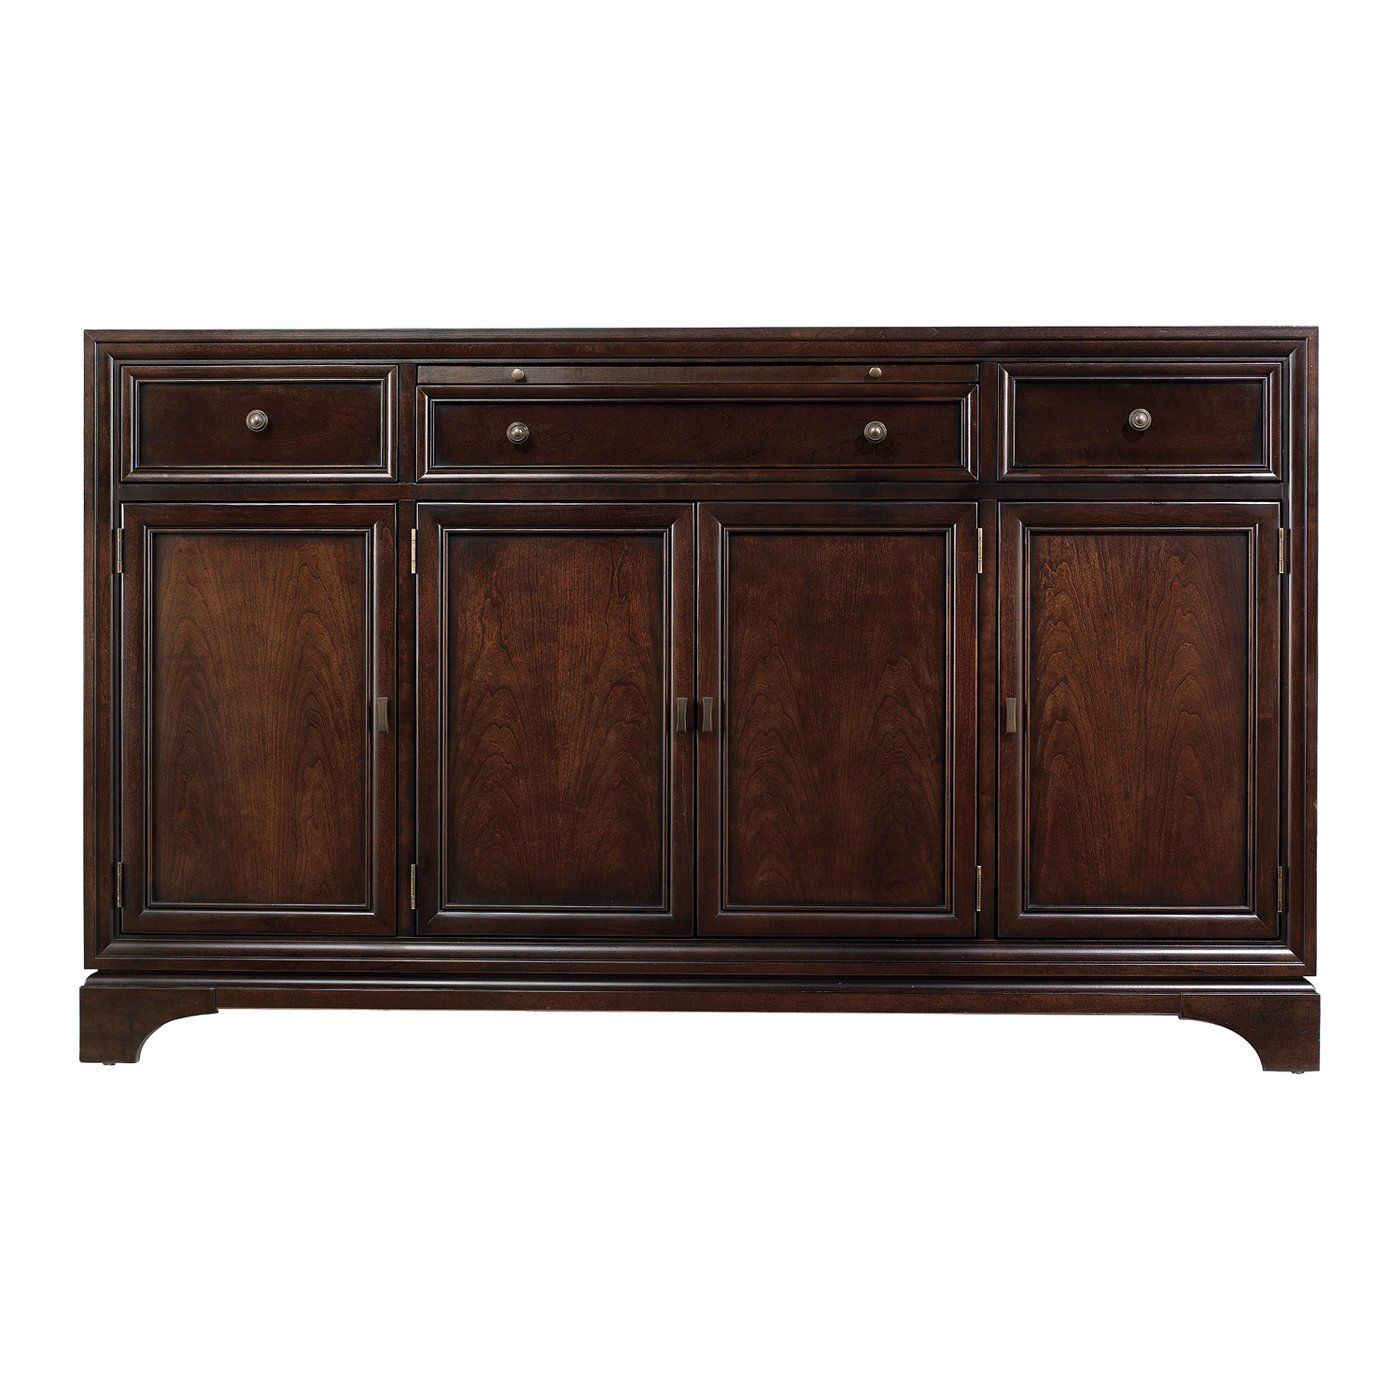 Stanley Furniture 816 61 07 Continuum Buffet Sideboard Within Current Steinhatchee Reclaimed Pine 4 Door Sideboards (View 9 of 20)